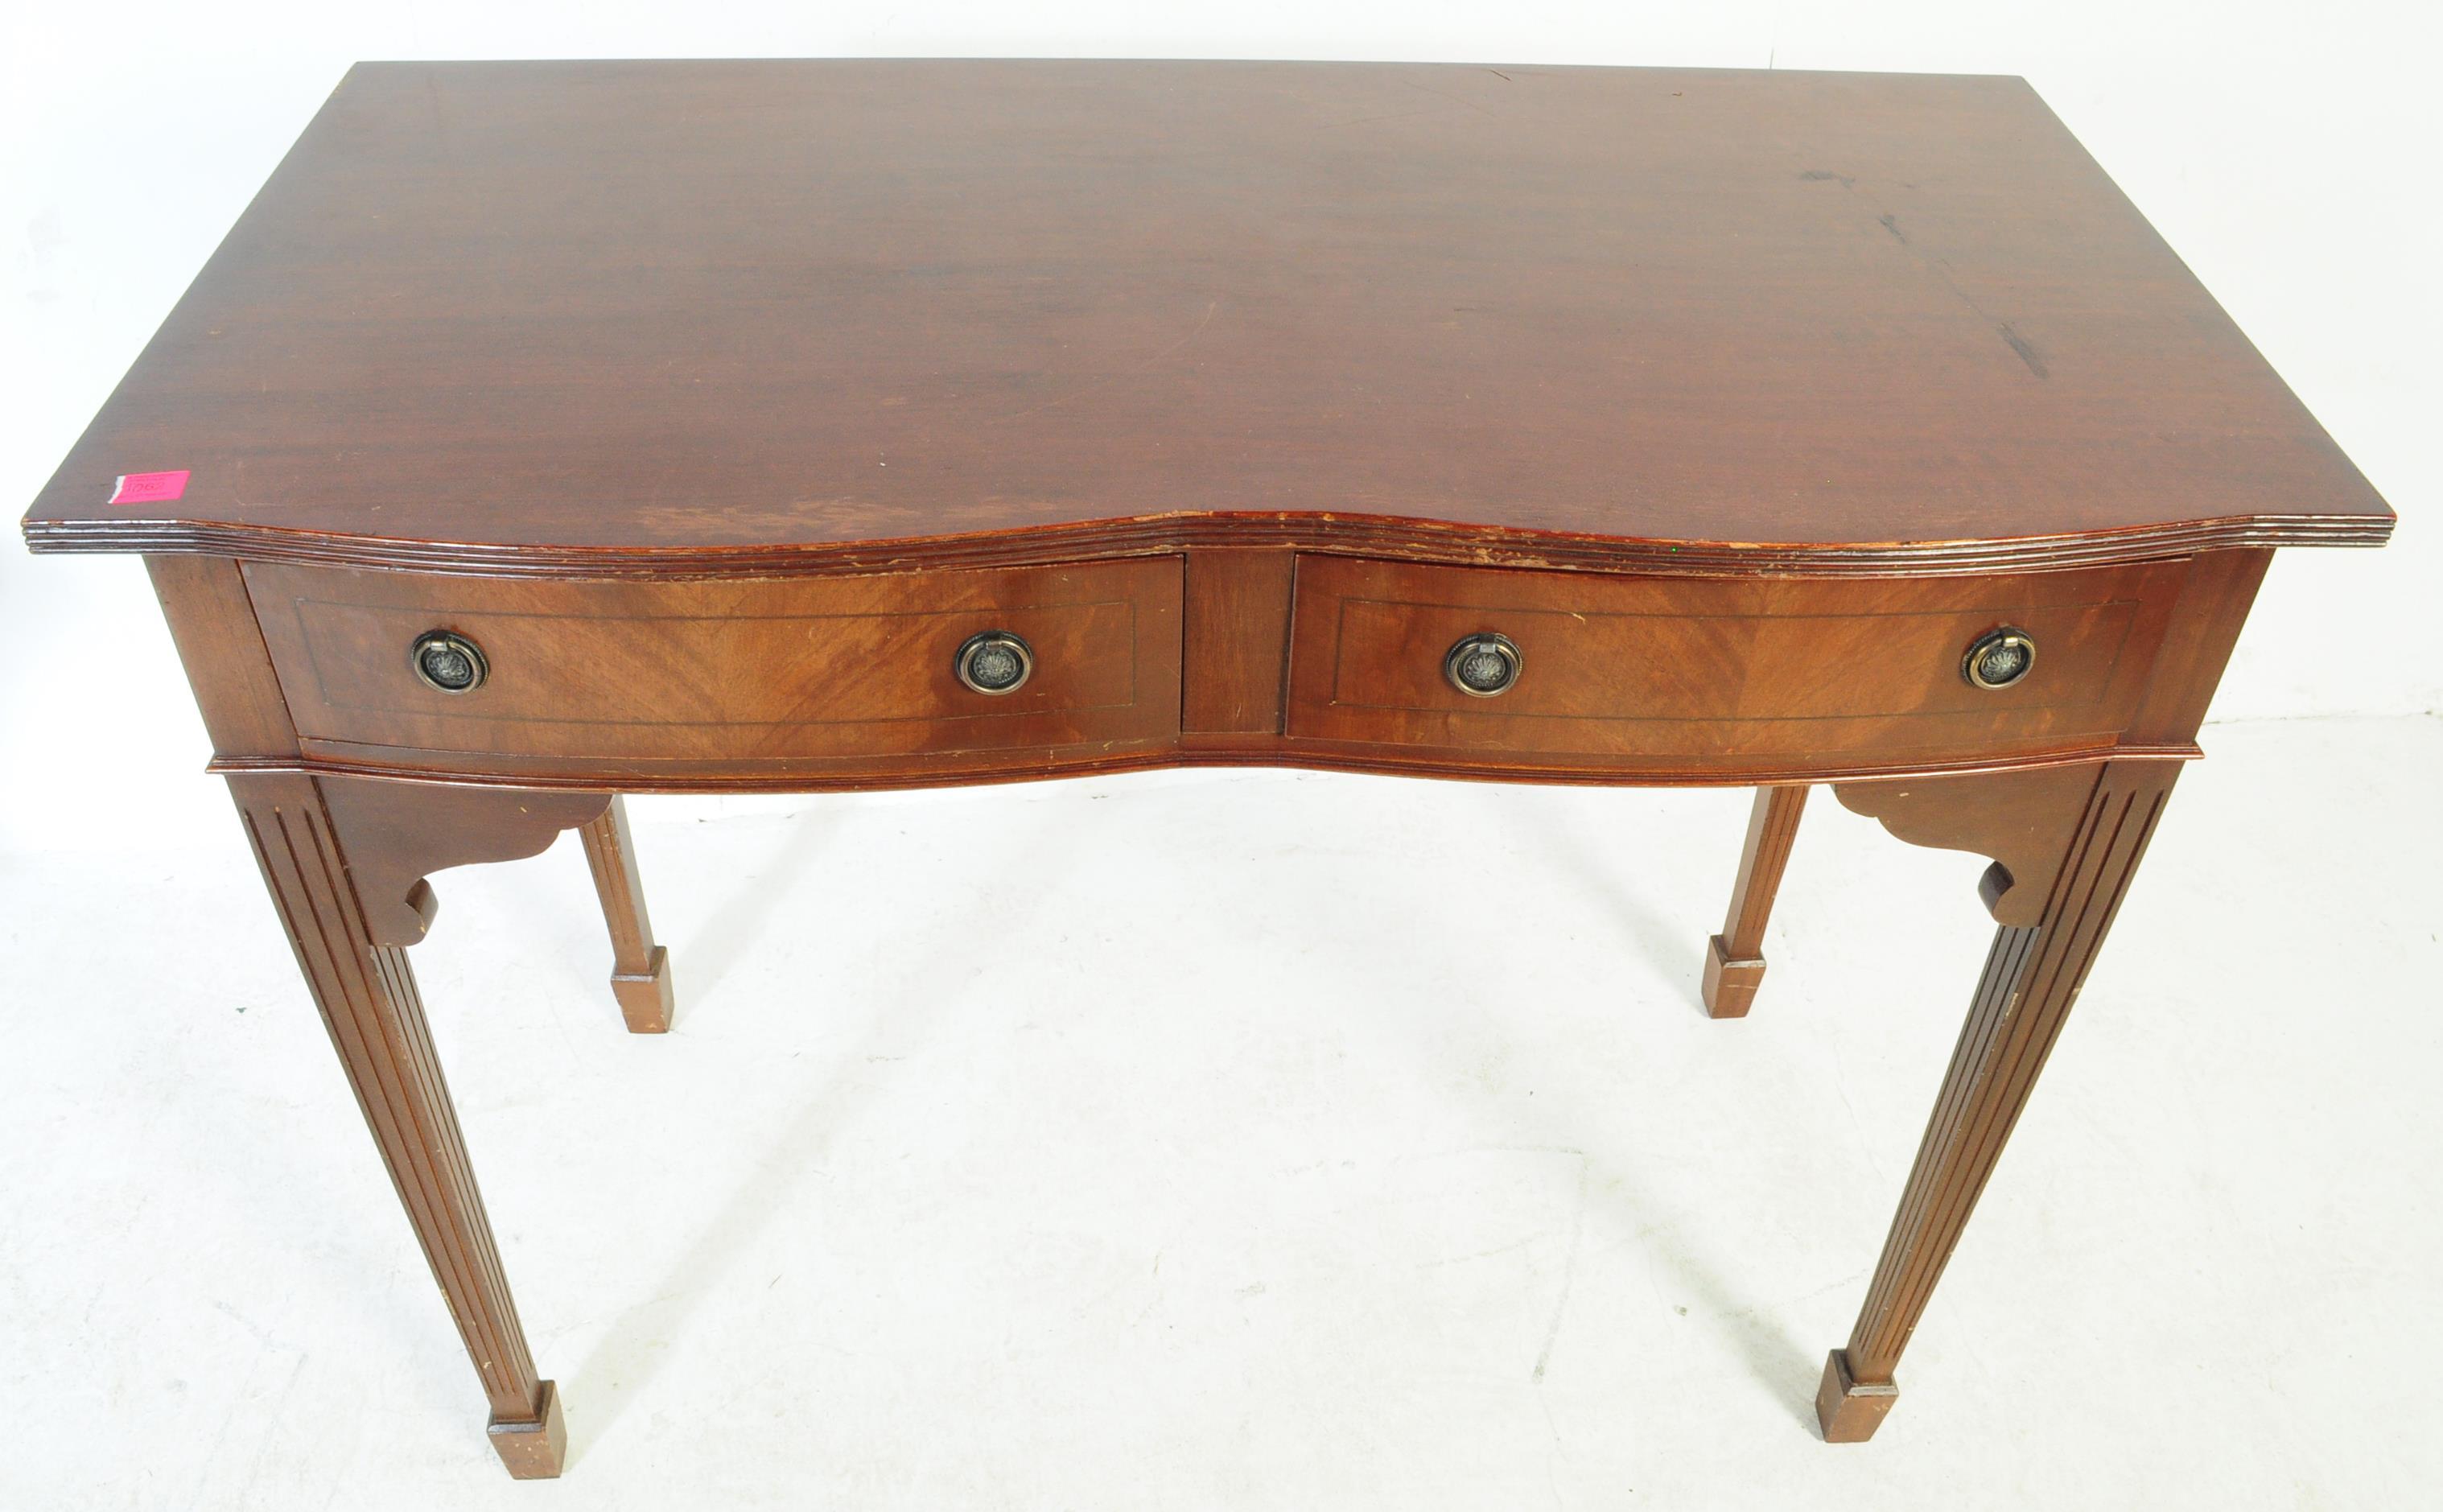 QUEEN ANNE REVIVAL FLAME MAHOGANY WRITING TABLE DESK - Image 5 of 5